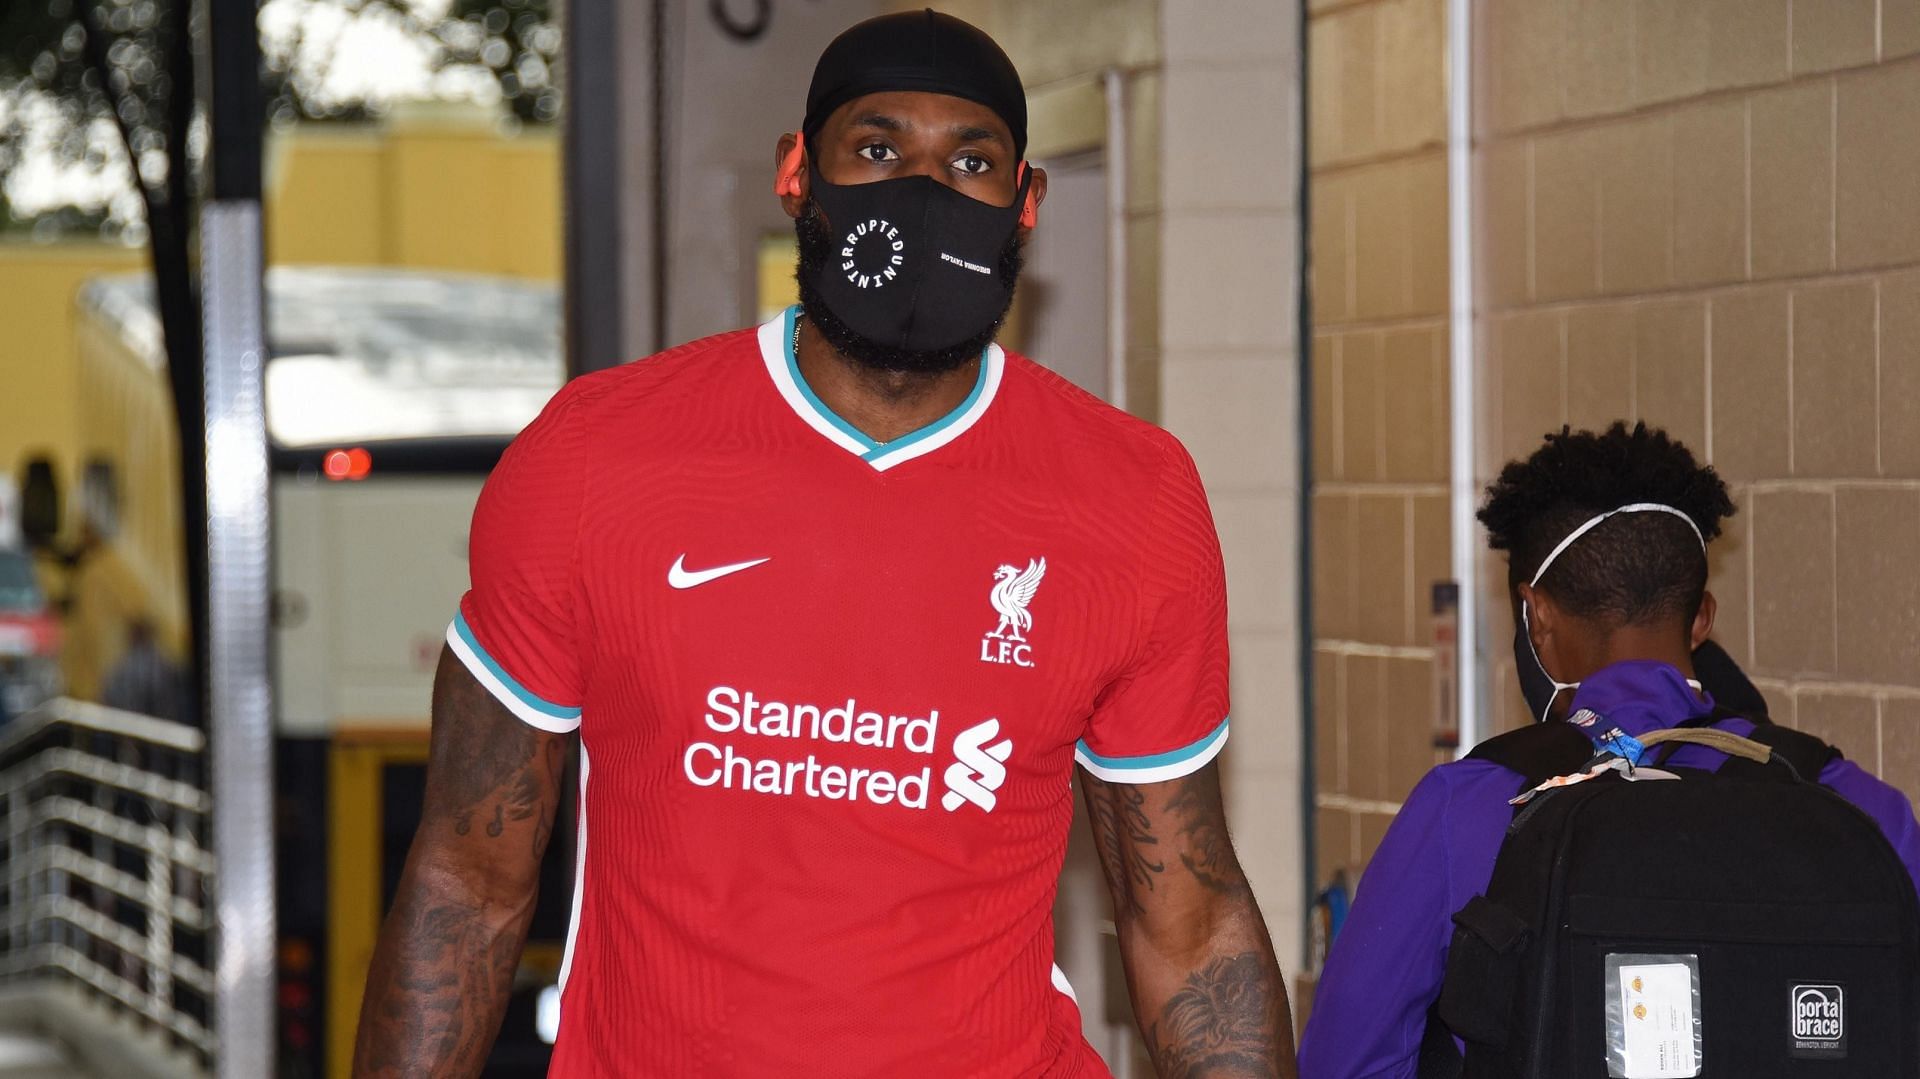 Lebron James arriving for the 2020 playoffs in Liverpool FC gear